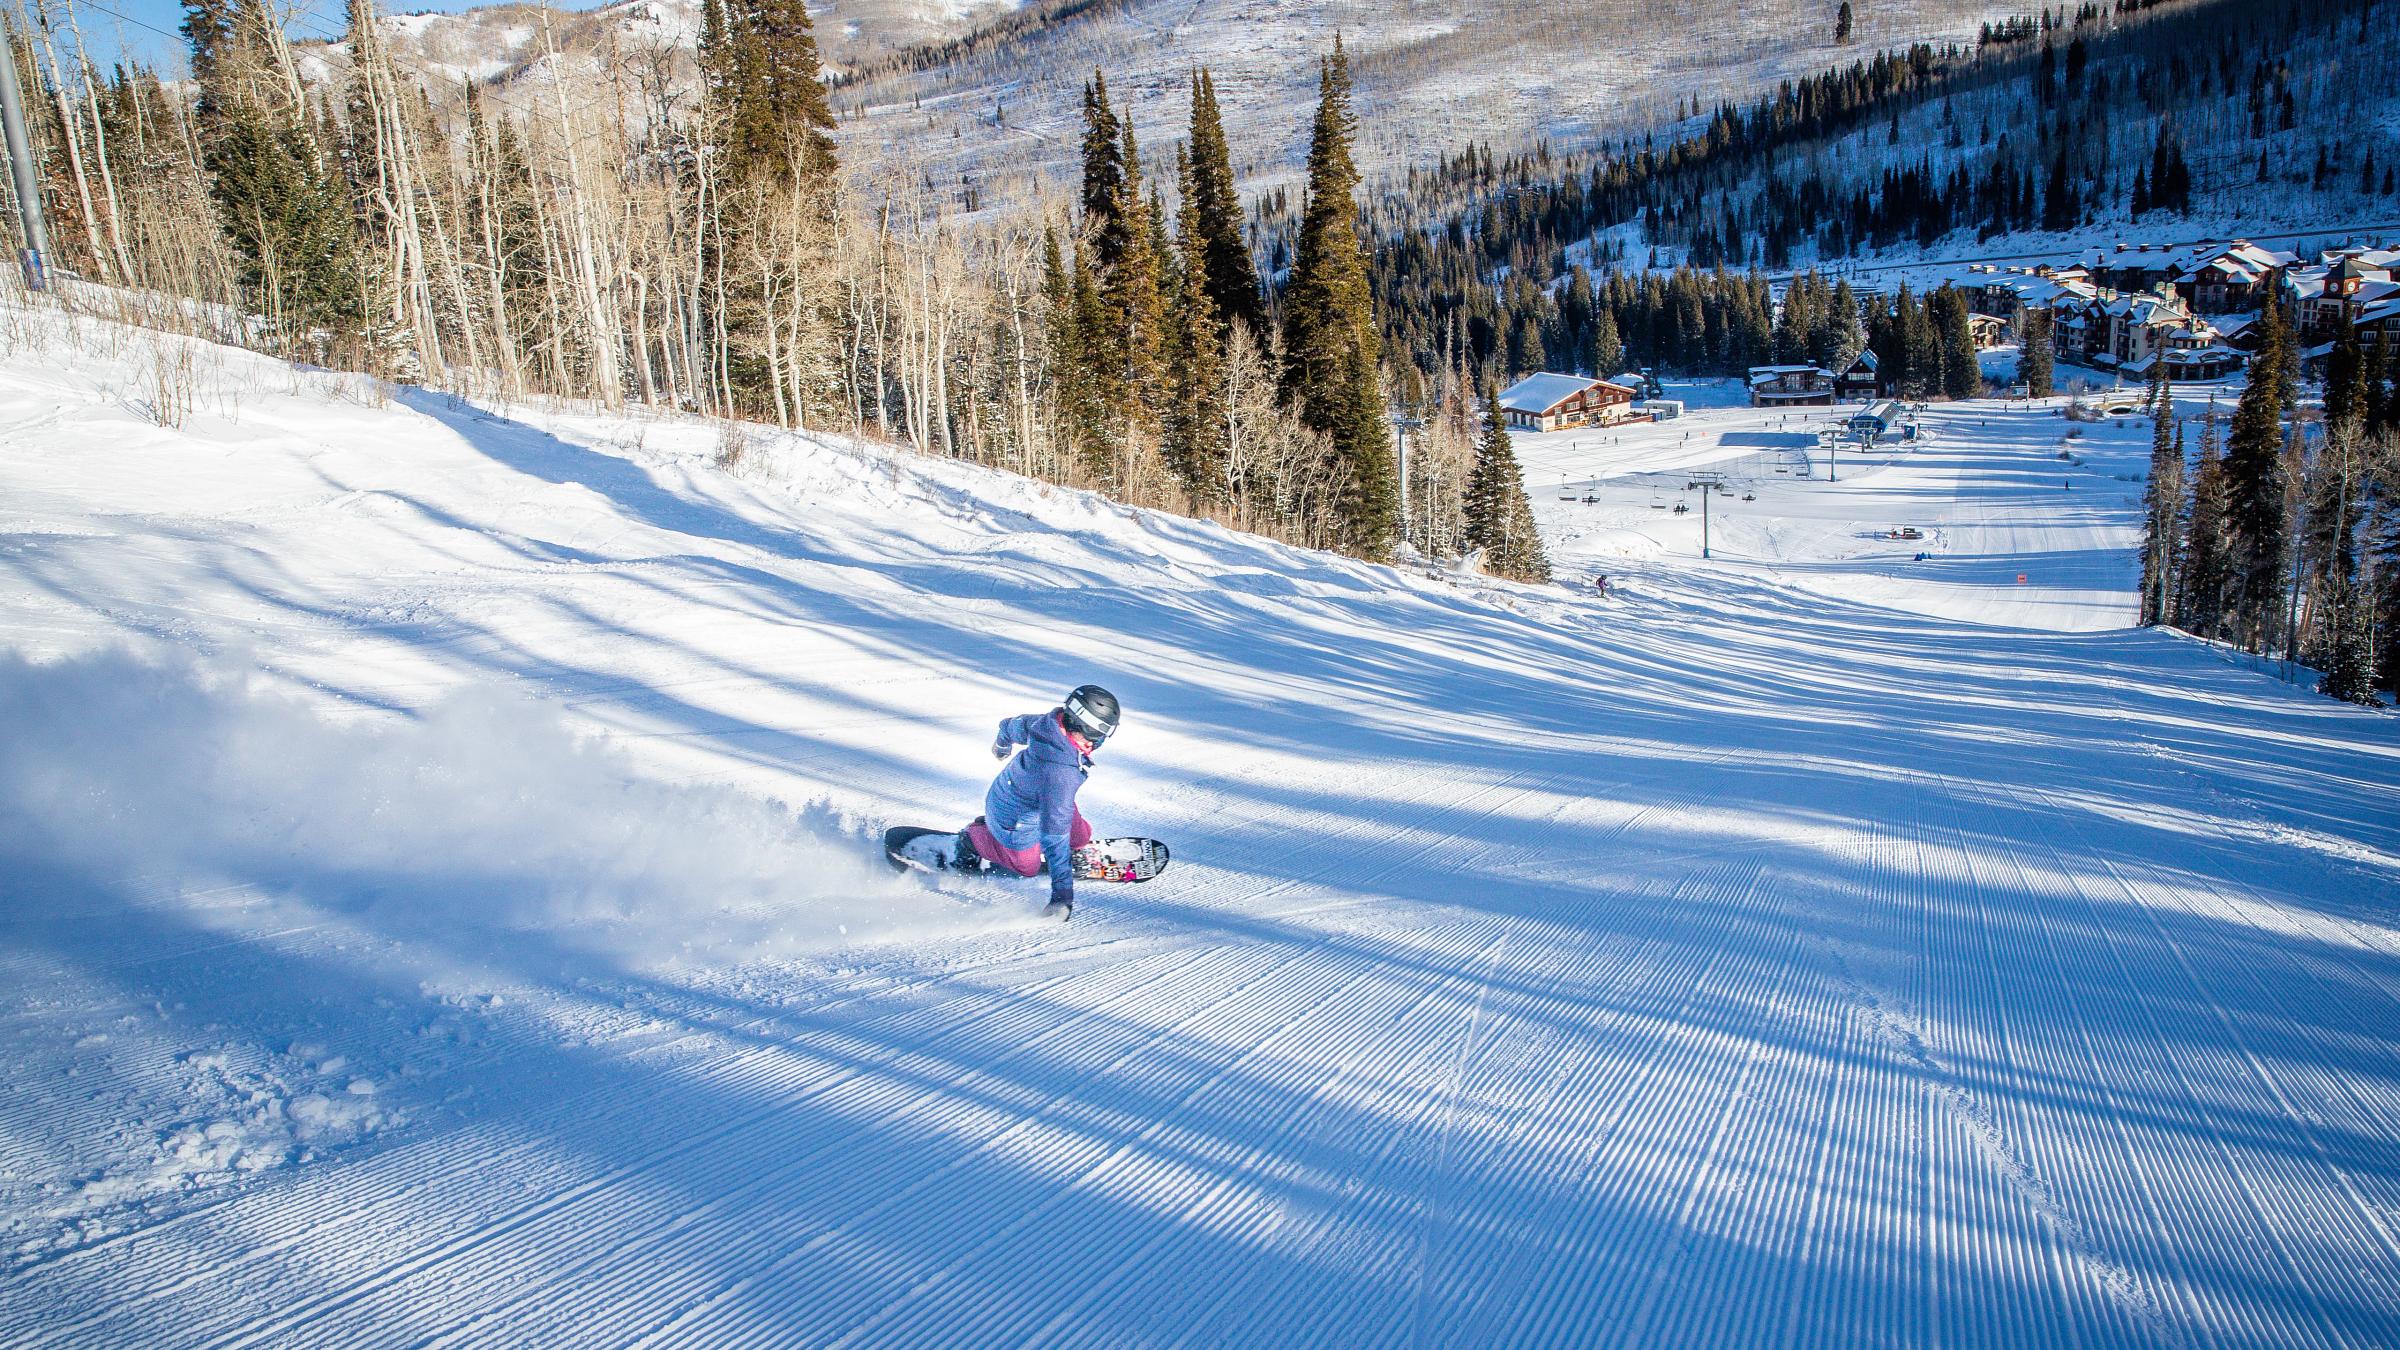 A female snowboarder makes a turn on a perfectly groomed slope at Solitude Mountain Resort